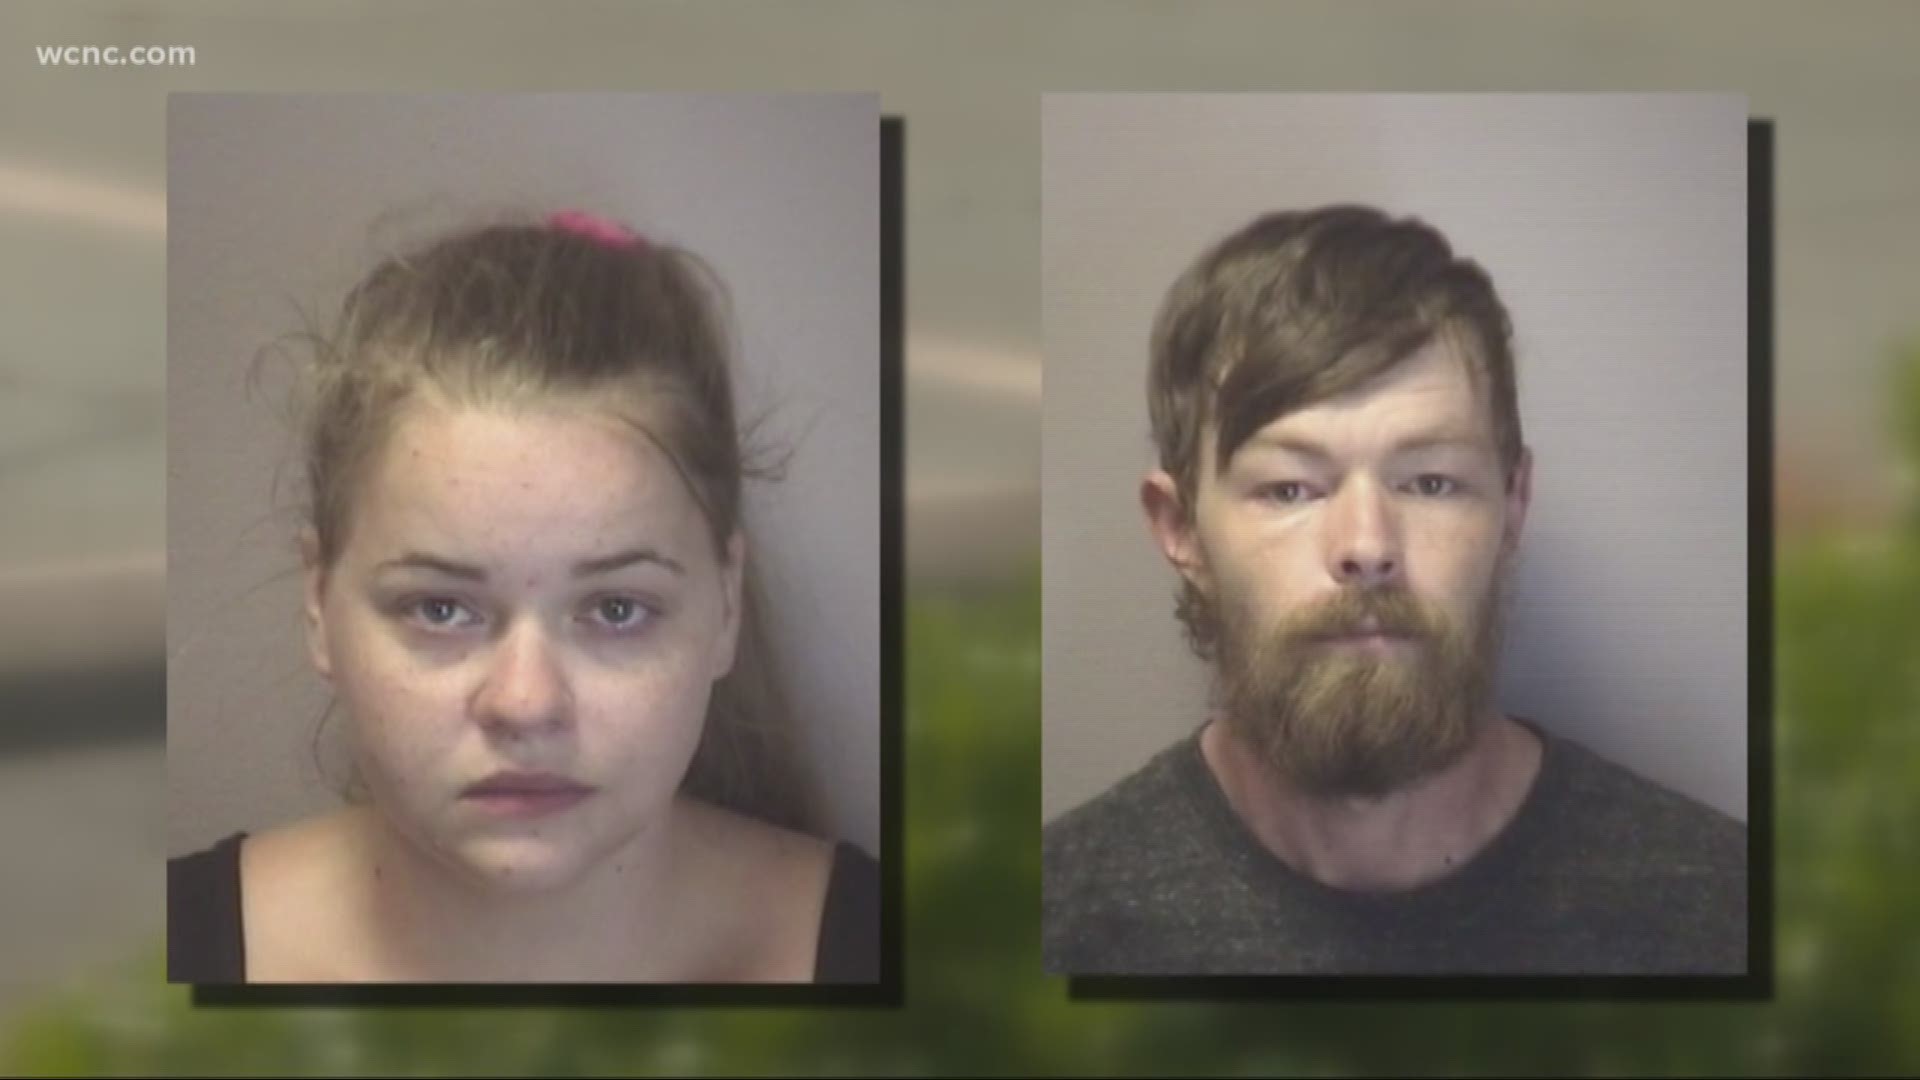 The mother, Haley Hargus, and her boyfriend, Brandon Walker, are facing several charges.